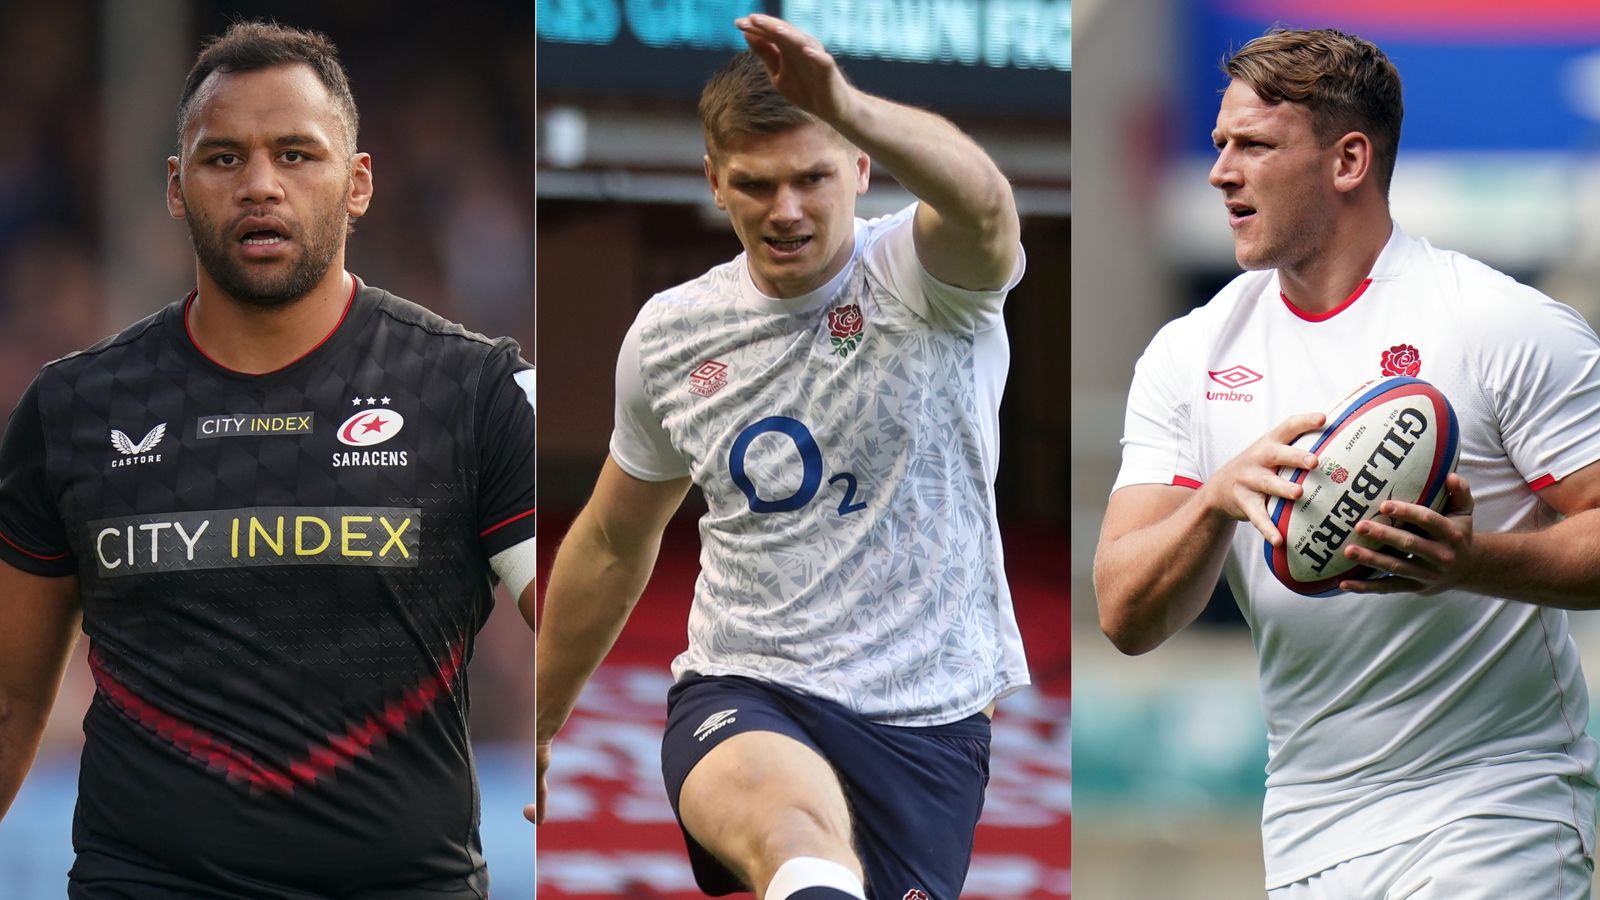 England 2022 Six Nations squad: Who’s well-placed? Who might miss out? Who are the players to look out for?